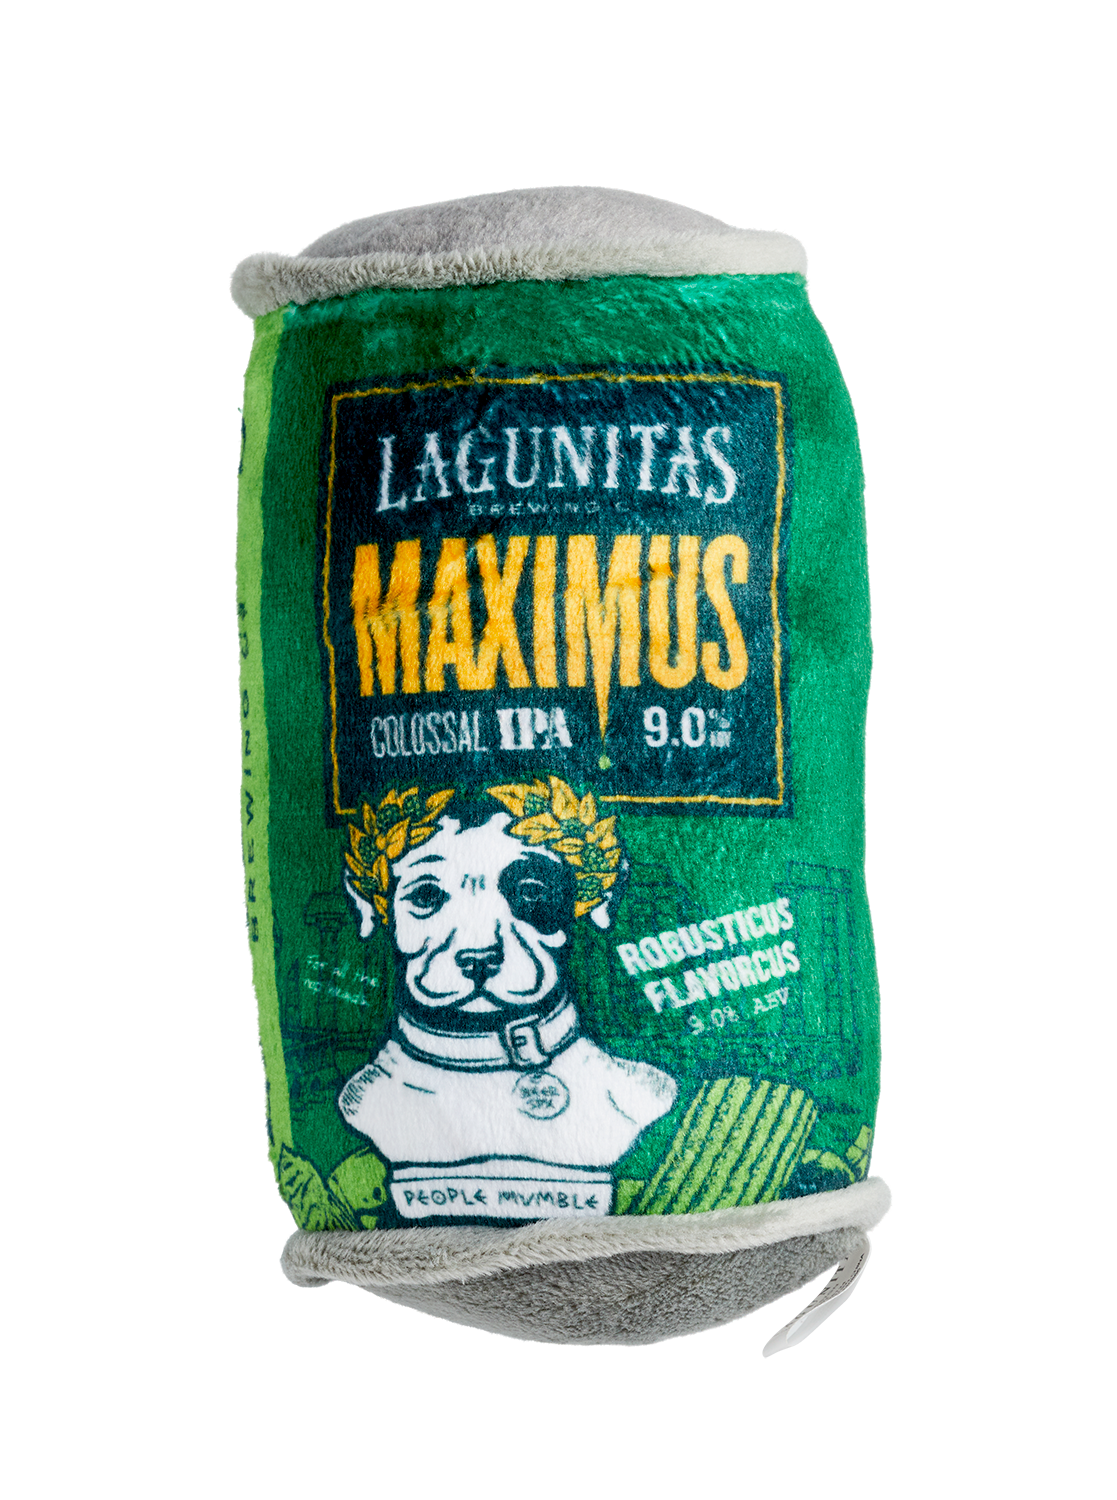 Introducing the Lagunitas Maximus Dog Toy - a playful treat for your furry companion! This pet-friendly toy takes the shape of our beloved Maximus bottle, featuring the iconic Lagunitas dog logo. Made with durable materials, this dog toy ensures long-lasting fun during playtime. Your pup might even start mimicking the Lagunitas spirit and requesting a cold Maximus after a thrilling play session. Bring joy to your furry friend today and let the good times (or wags) begin!"